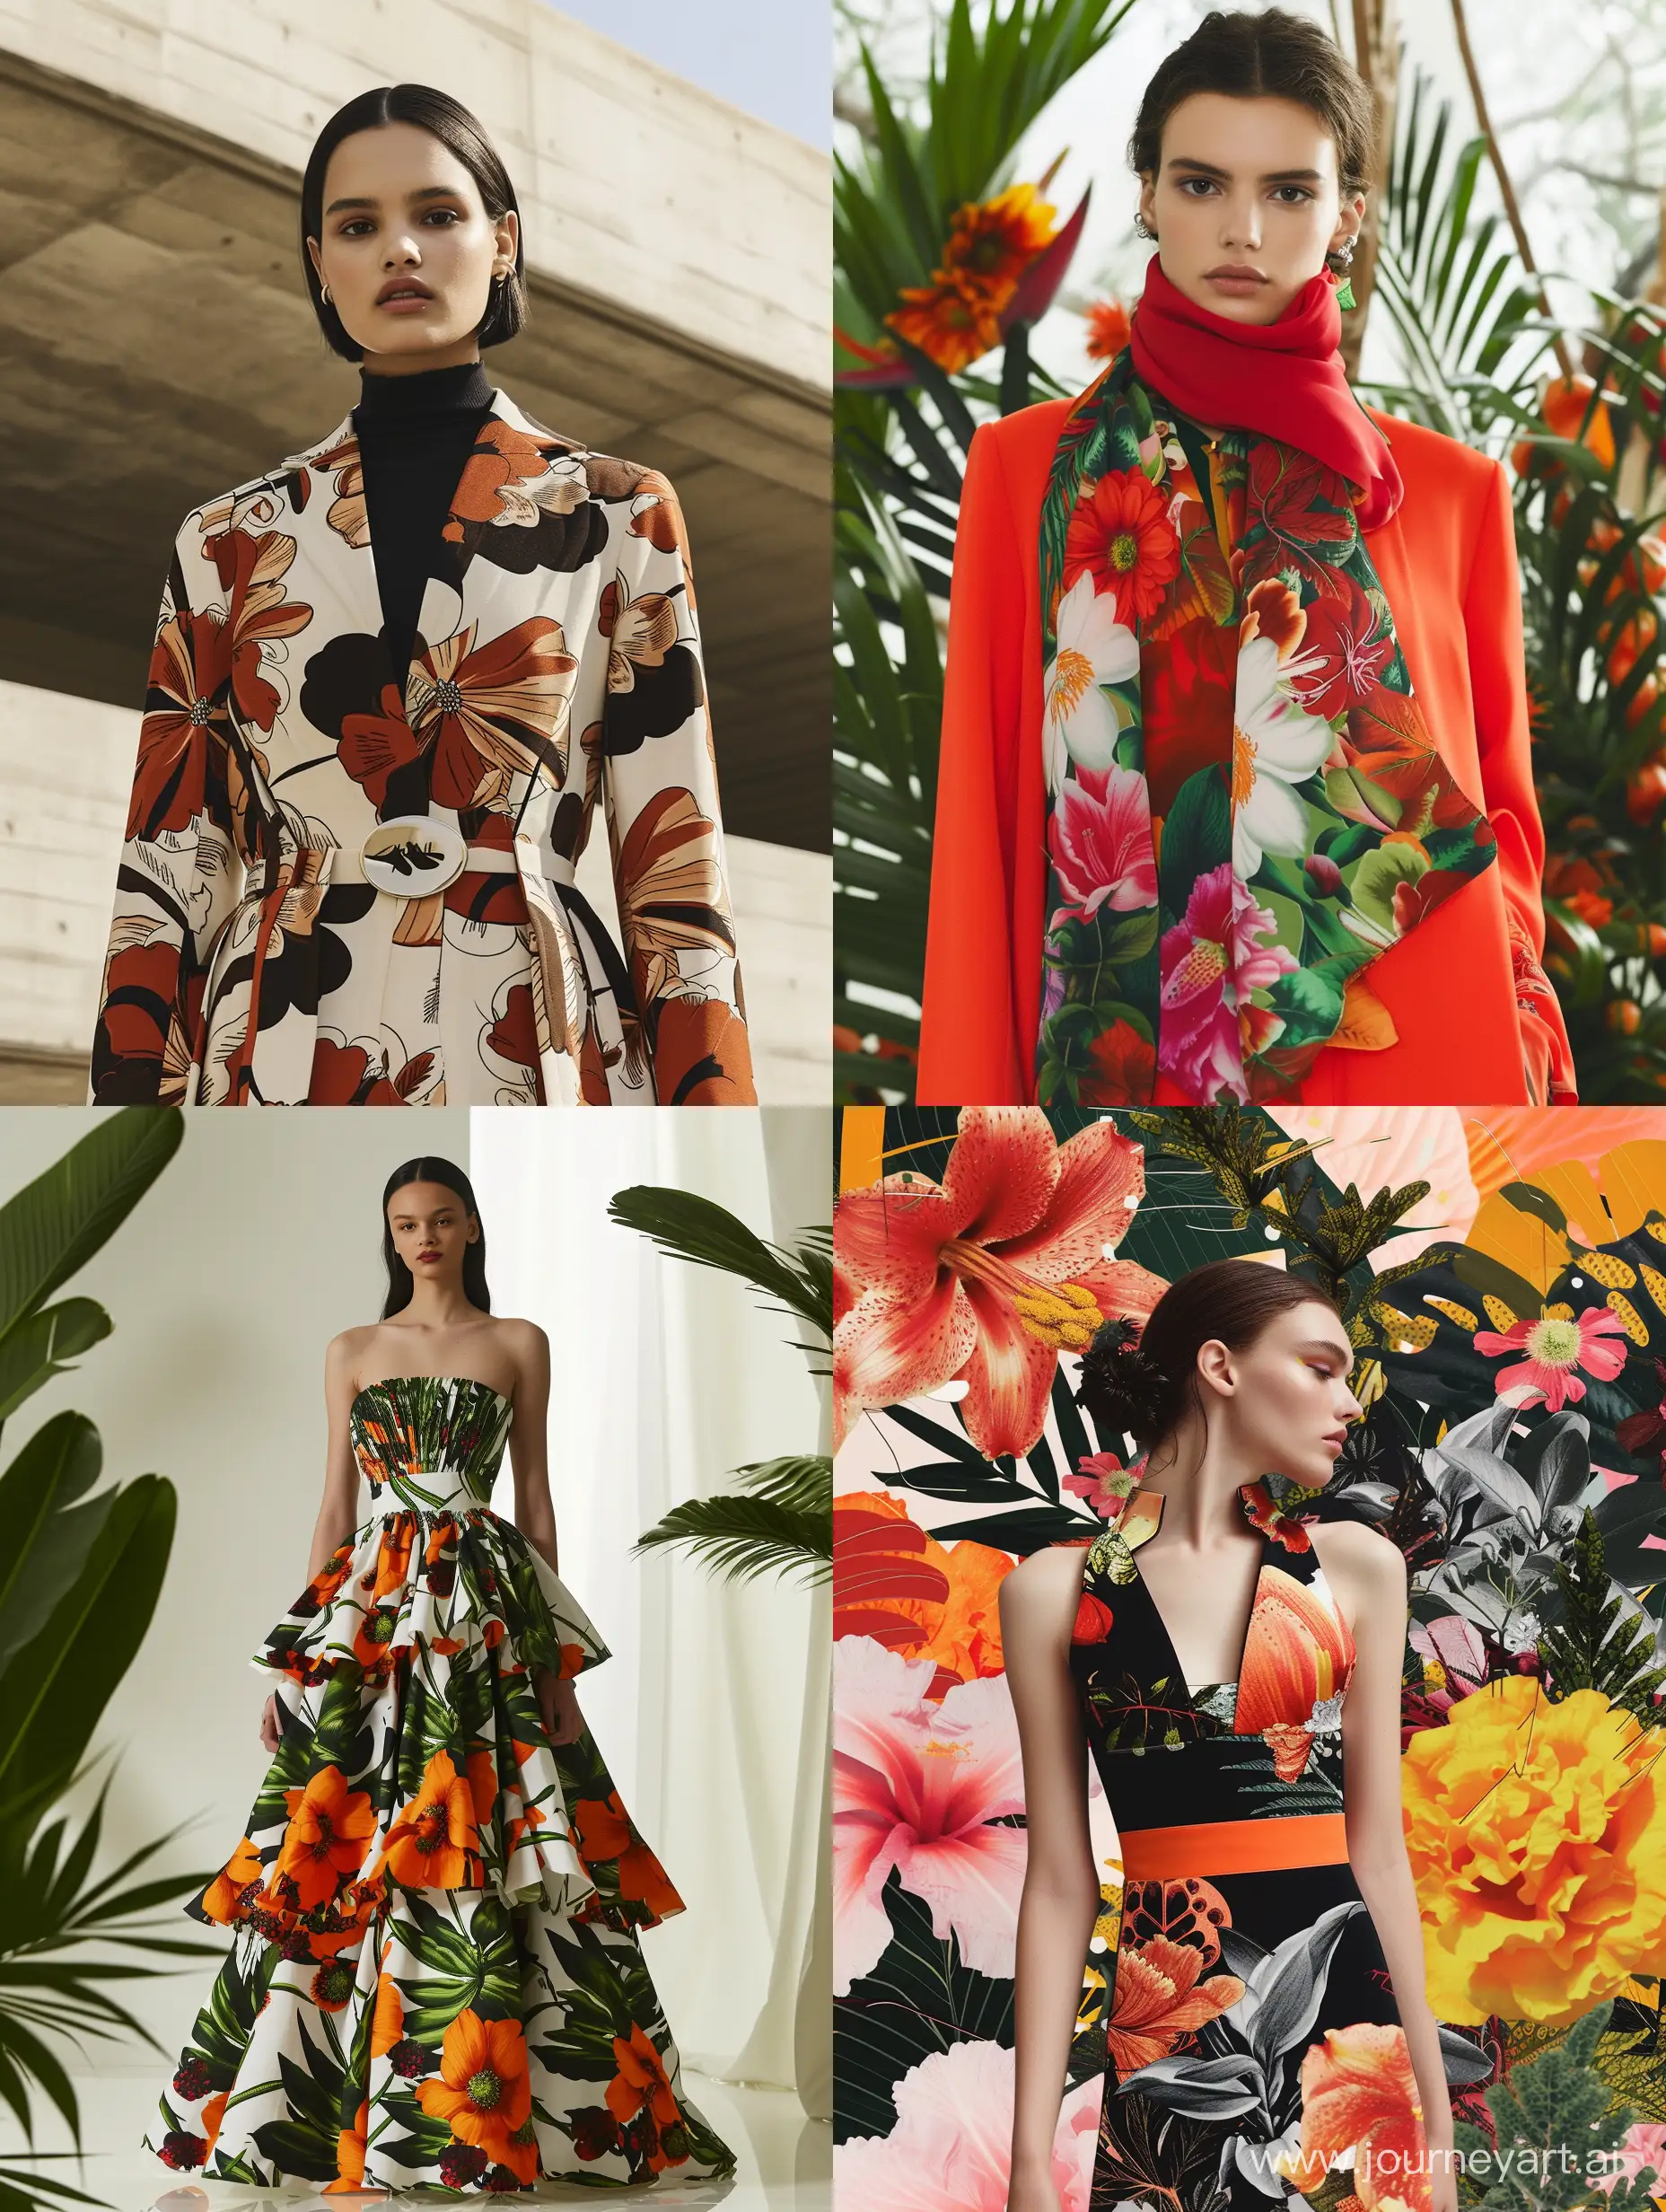 2.Urban Botanica: Where Nature Meets City Chic ,harmony between nature and metropolitan life, blending the softness of floral prints with the sleek lines of modern design: COUTURE DESIGN COLLECTION THEME INSPIRATION IMAGE